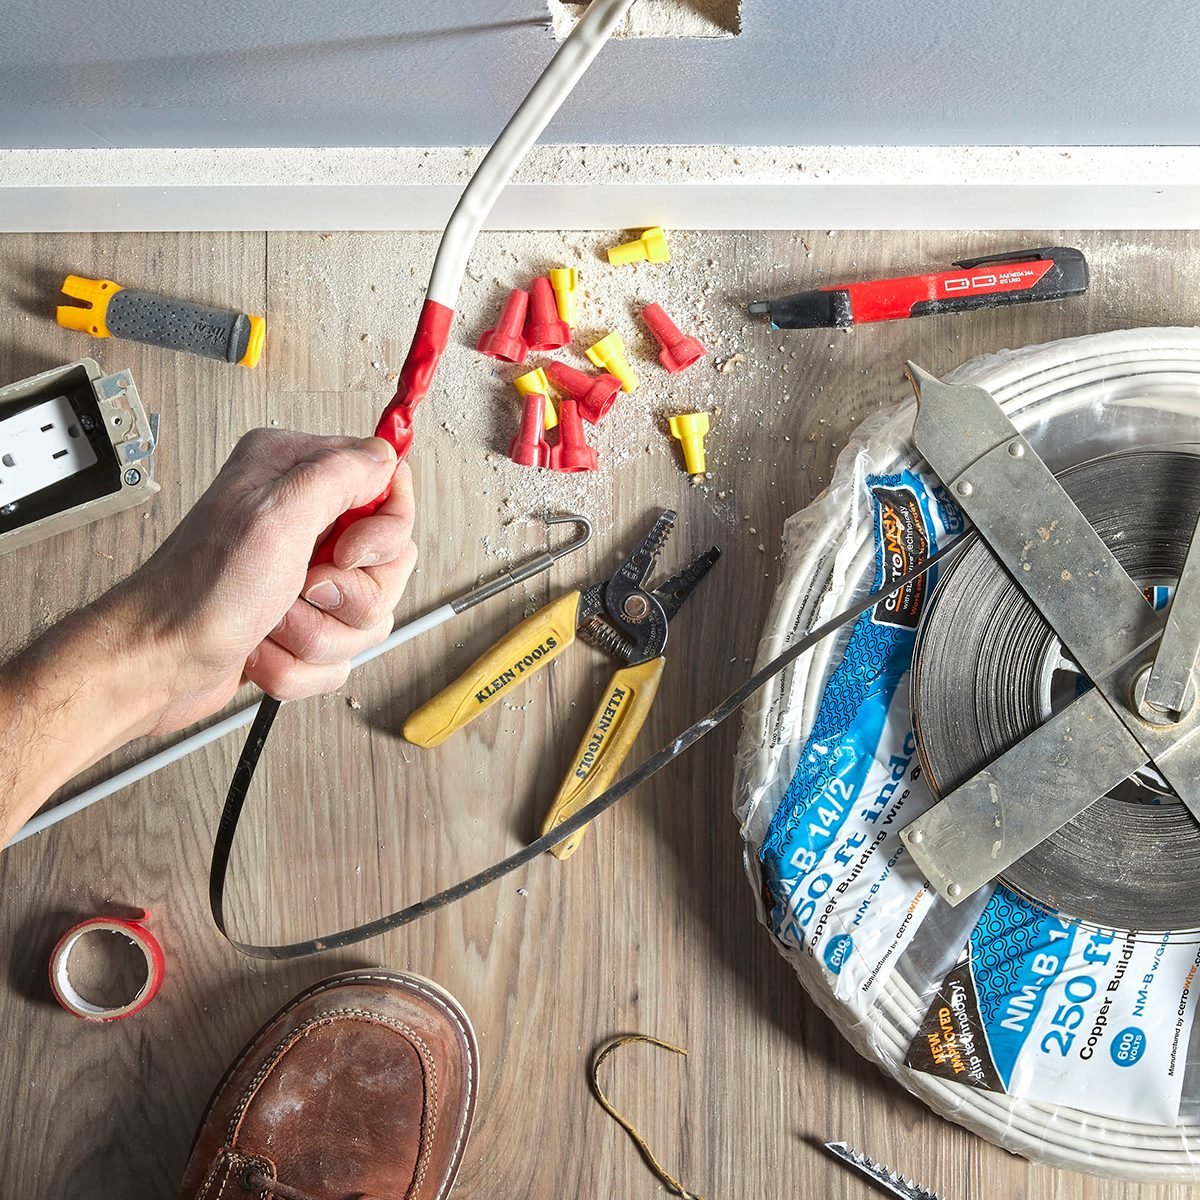 How to Run Electrical Wire Through Walls